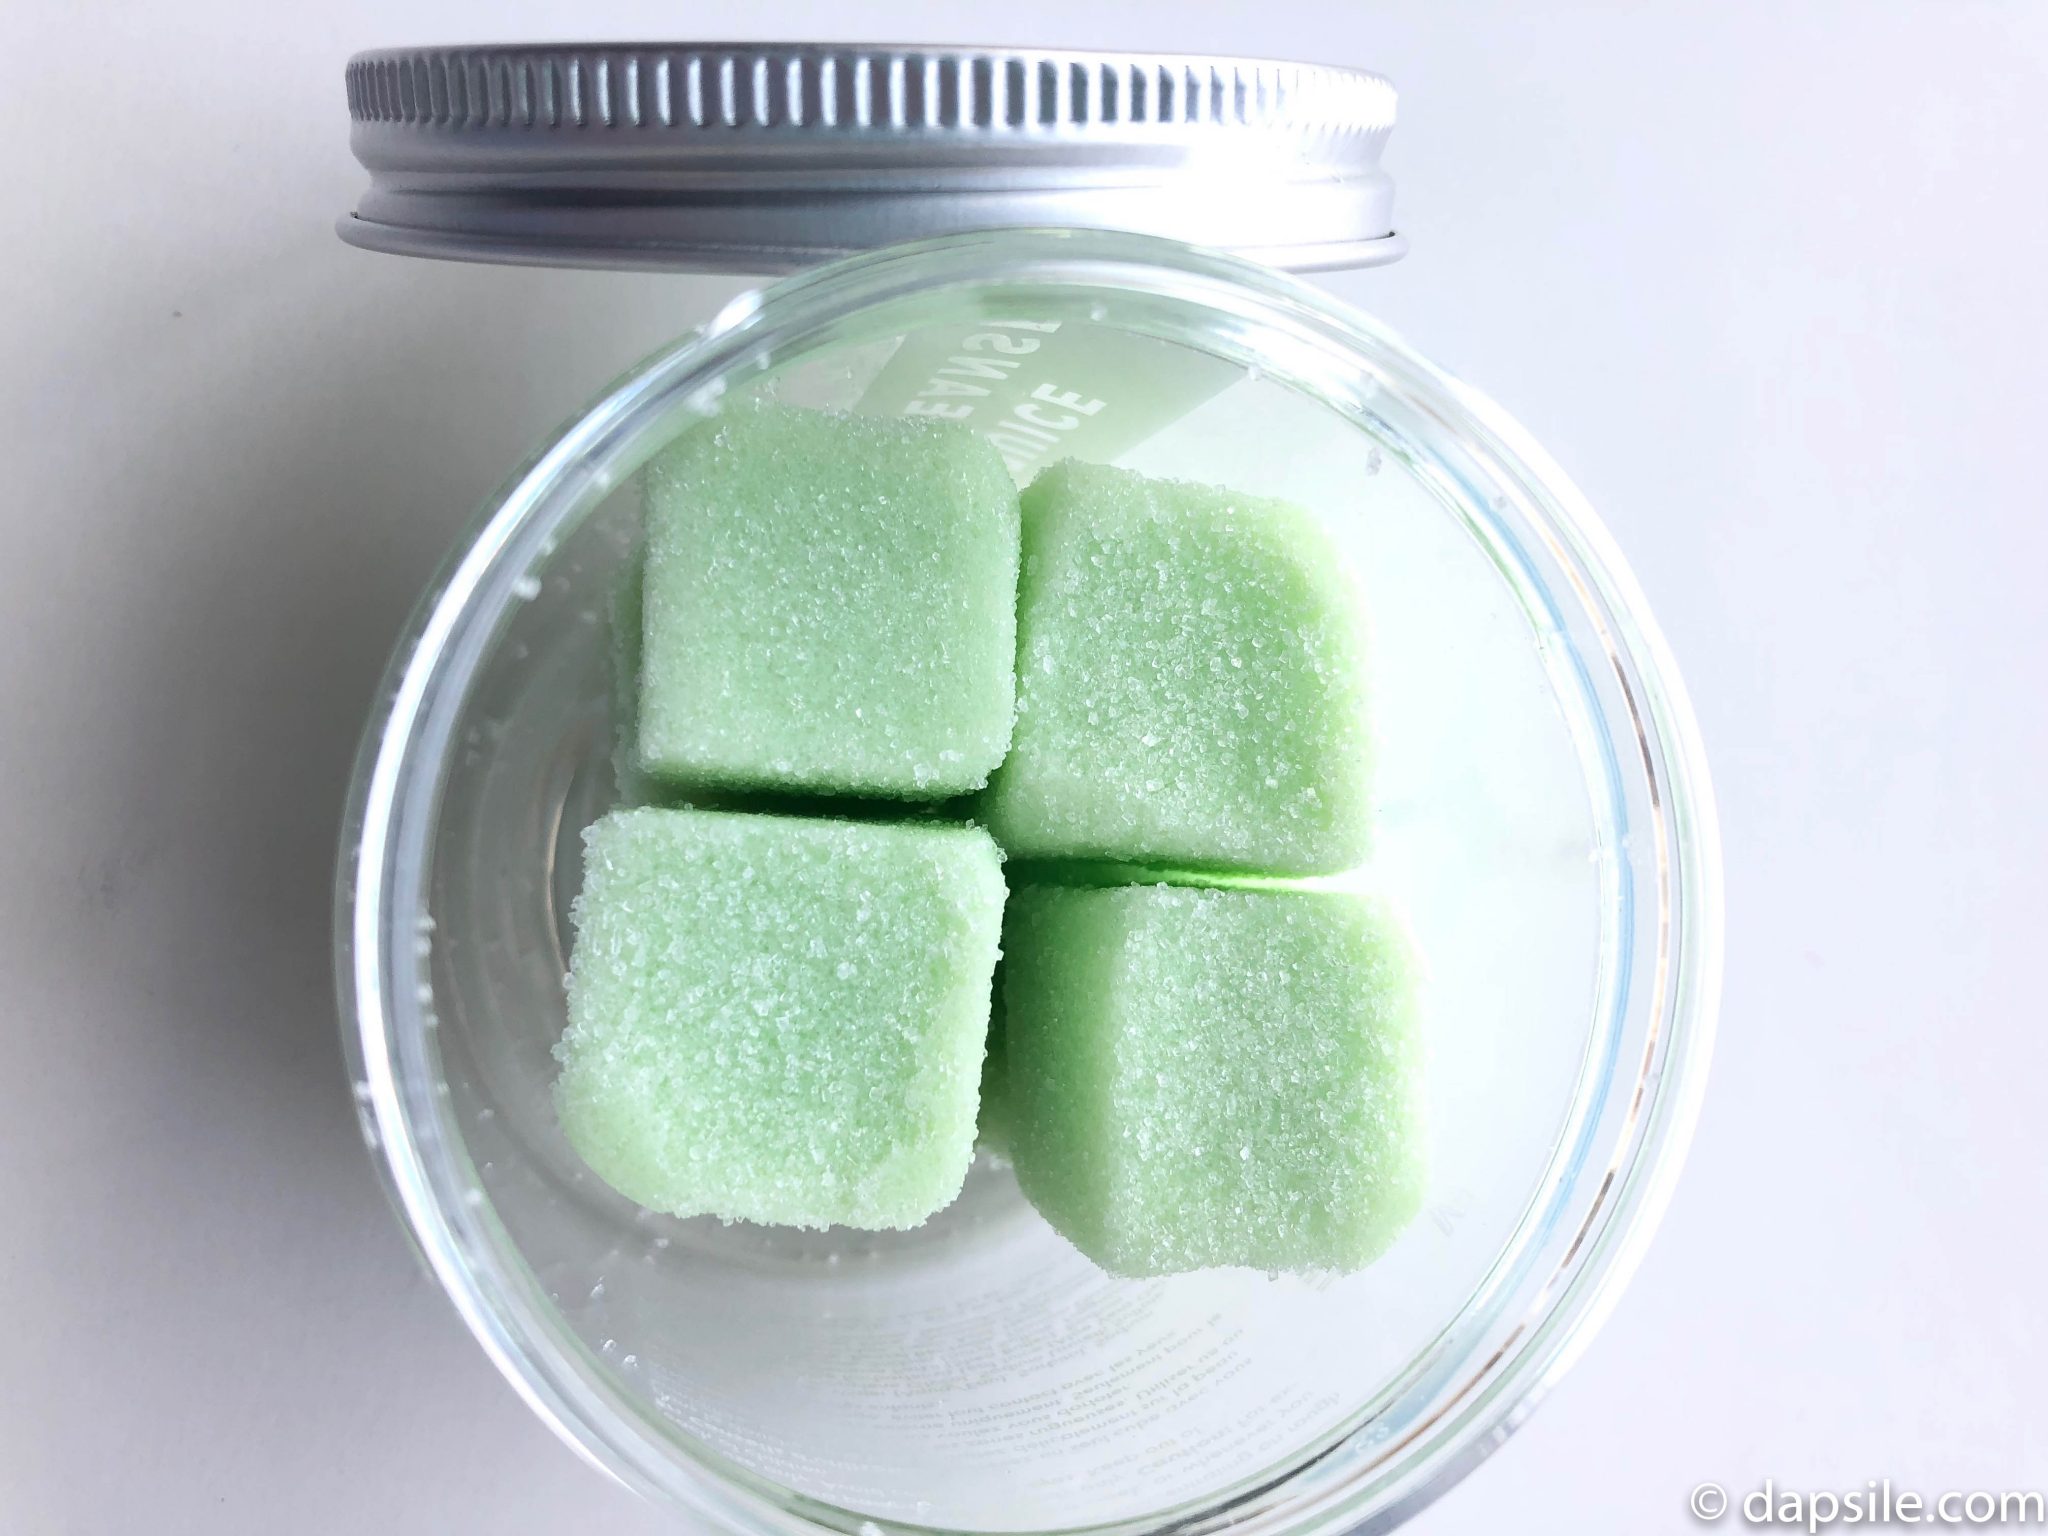 Harper + Ari Exfoliating Sugar Cubes viewed from the top of the open jar